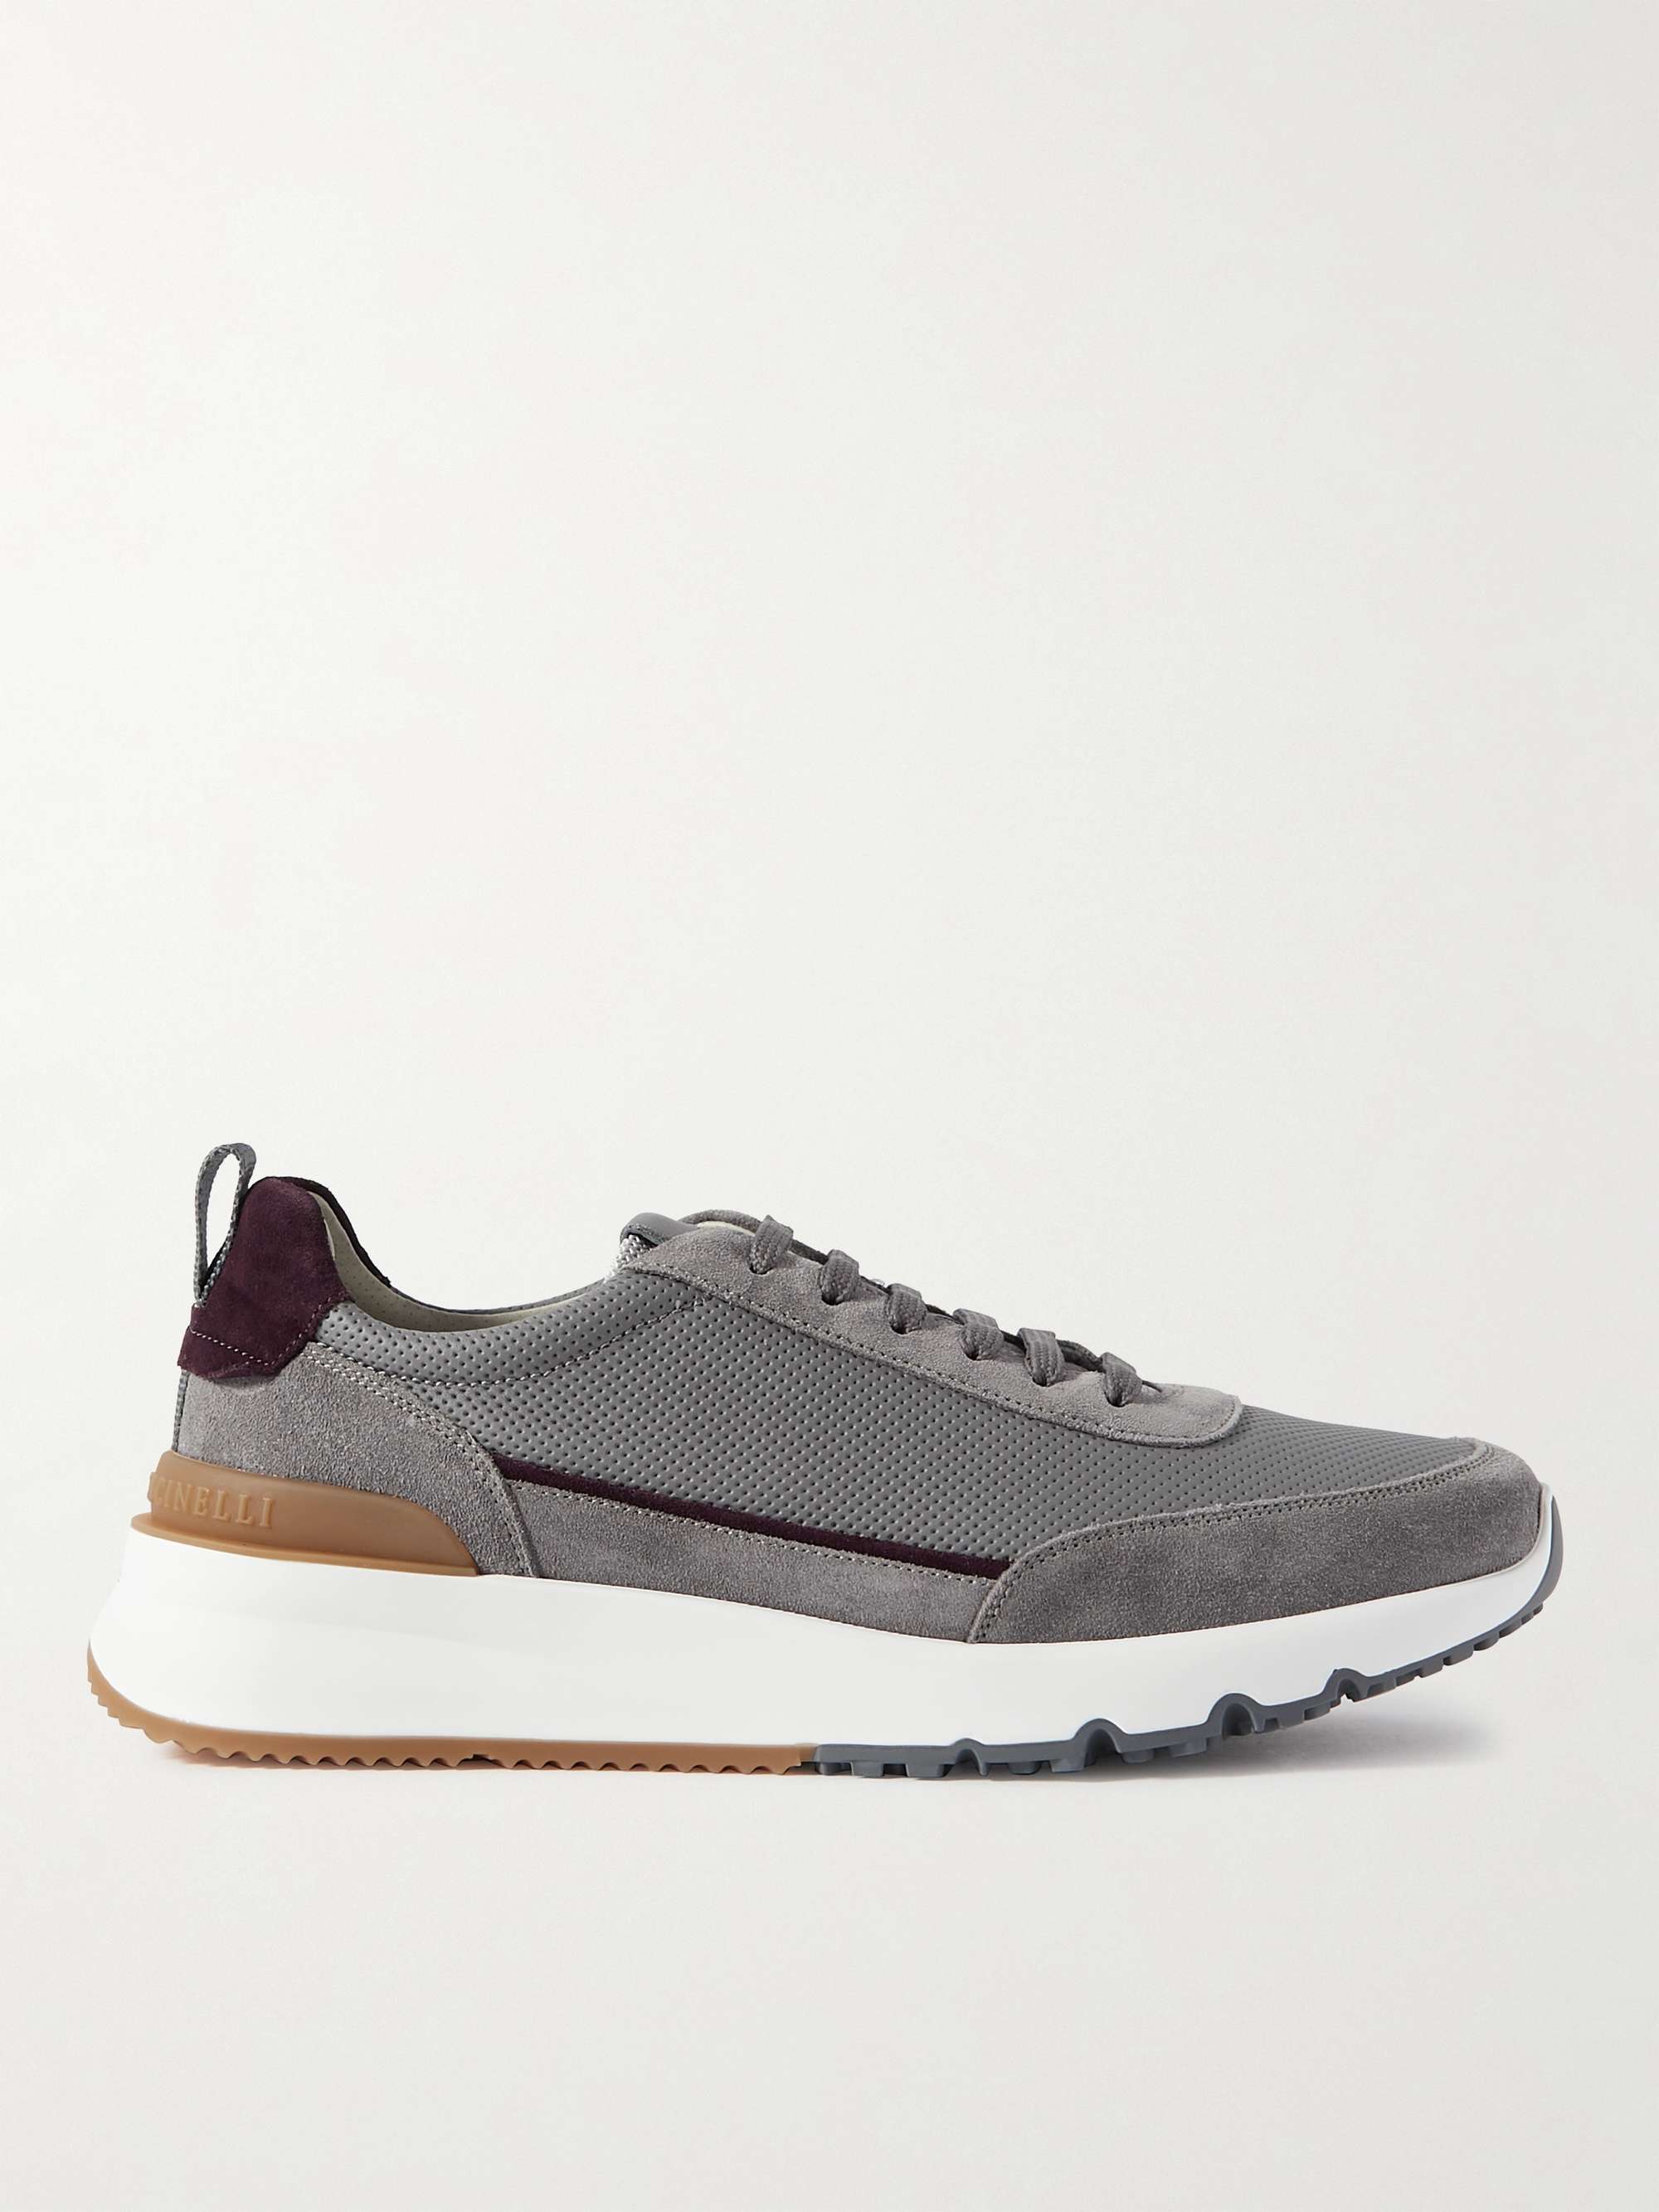 BRUNELLO CUCINELLI Perforated Leather and Suede Sneakers